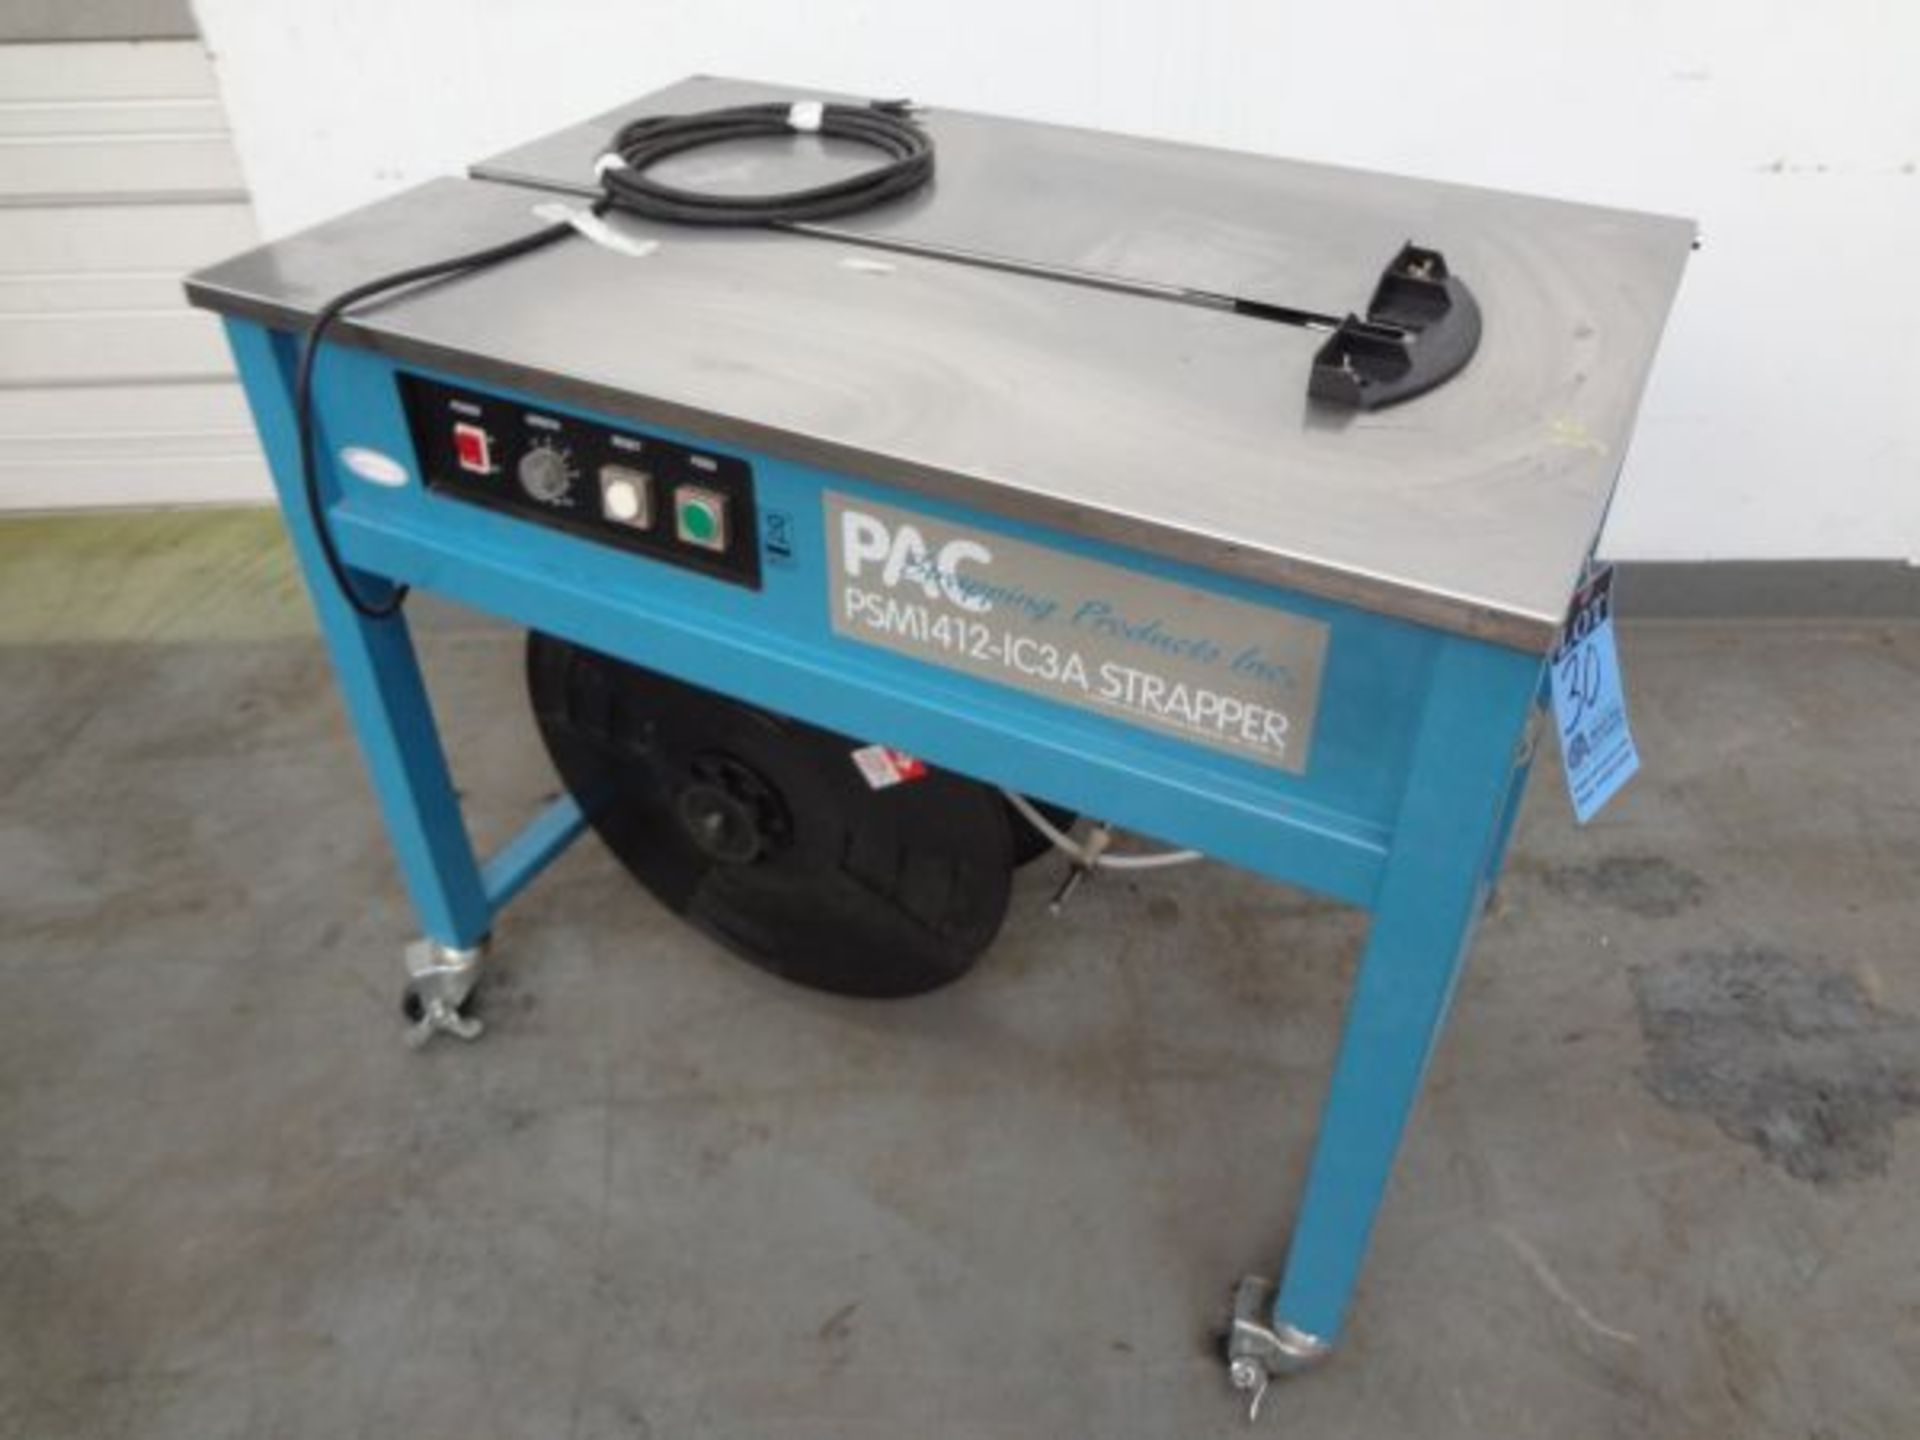 PAC STRAPPING PRODUCTS MODEL PSM1412-1C3A STRAPPER